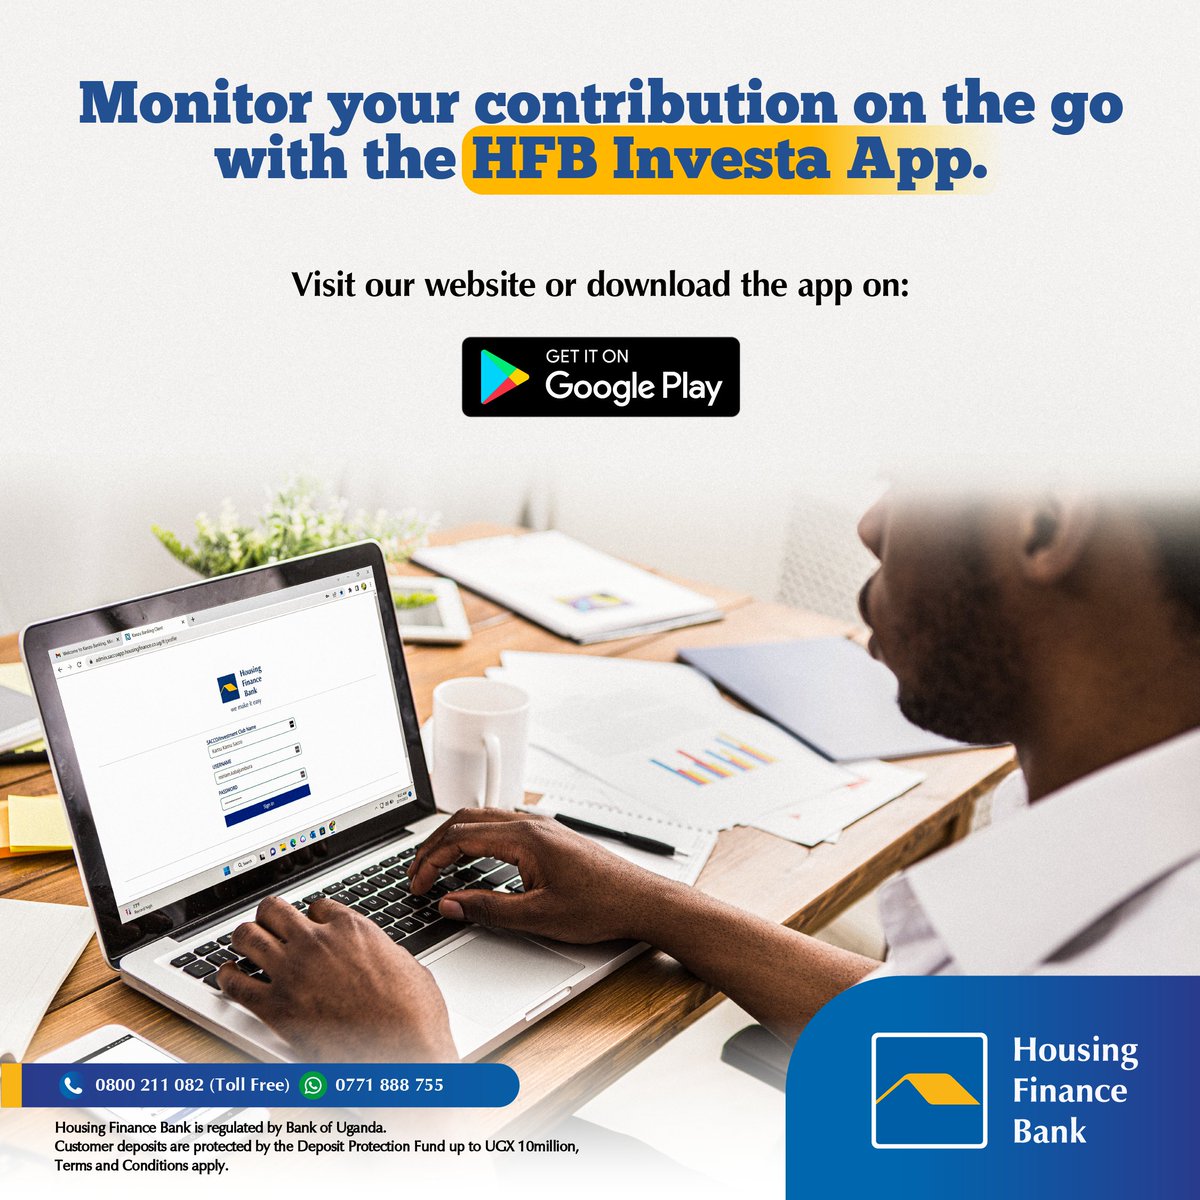 #AD
Whether your overseas or out on a vacation, you can now keep a keen track off all your investment group was contributions seamless via #HFBInvestaApp or visit user.saccoapp.housingfinance.co.ug

#WeMakeItEasy